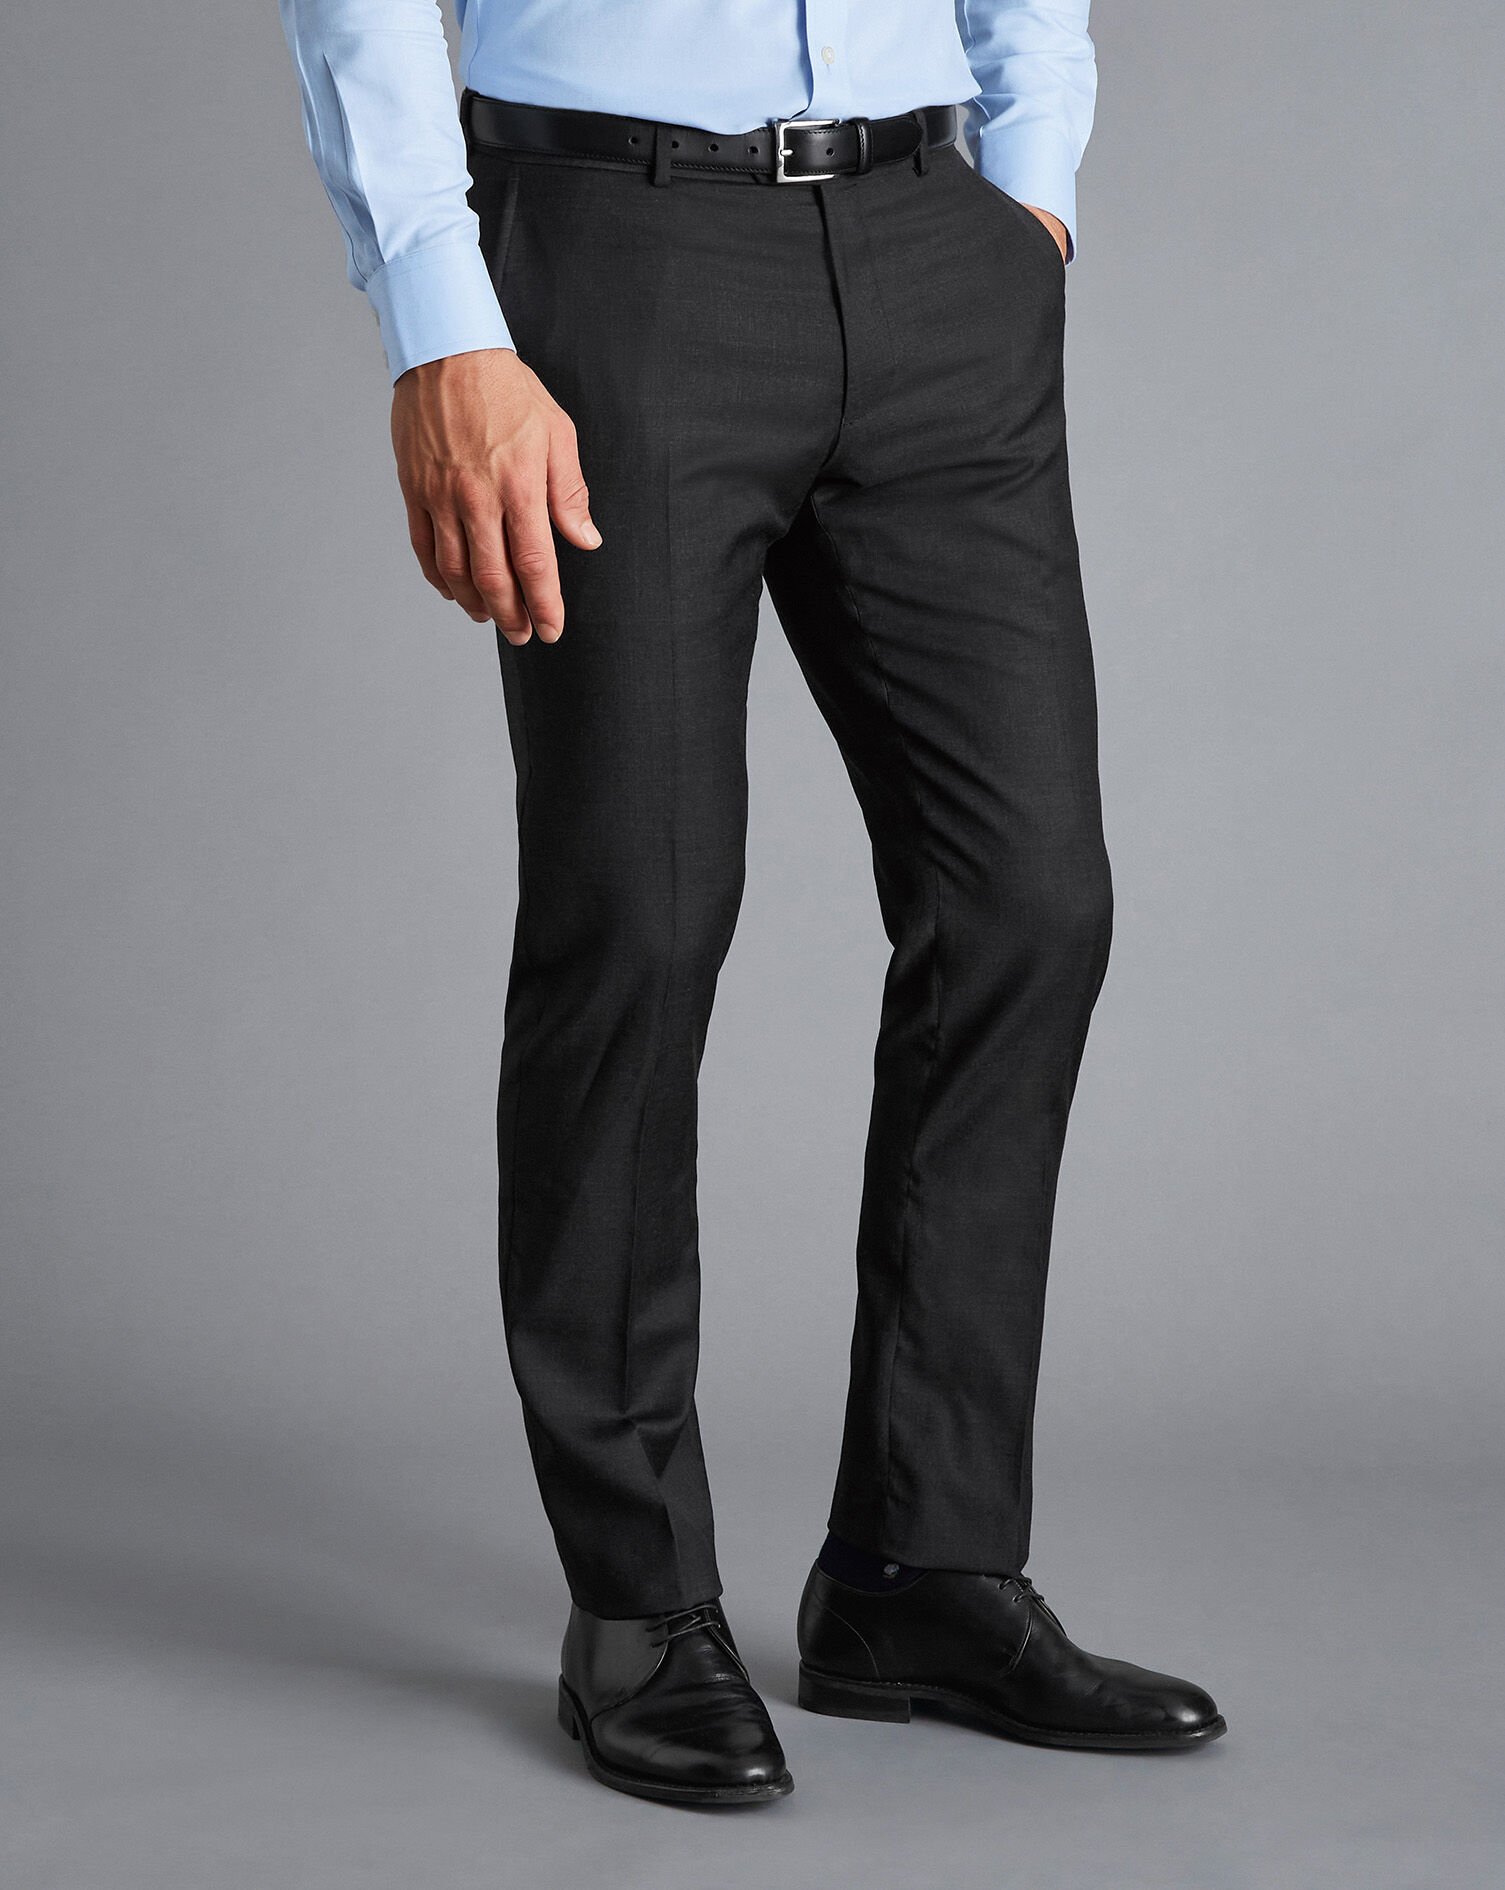 The Best Black Pants To Take You From Work To Play  URBAN LIST GLOBAL